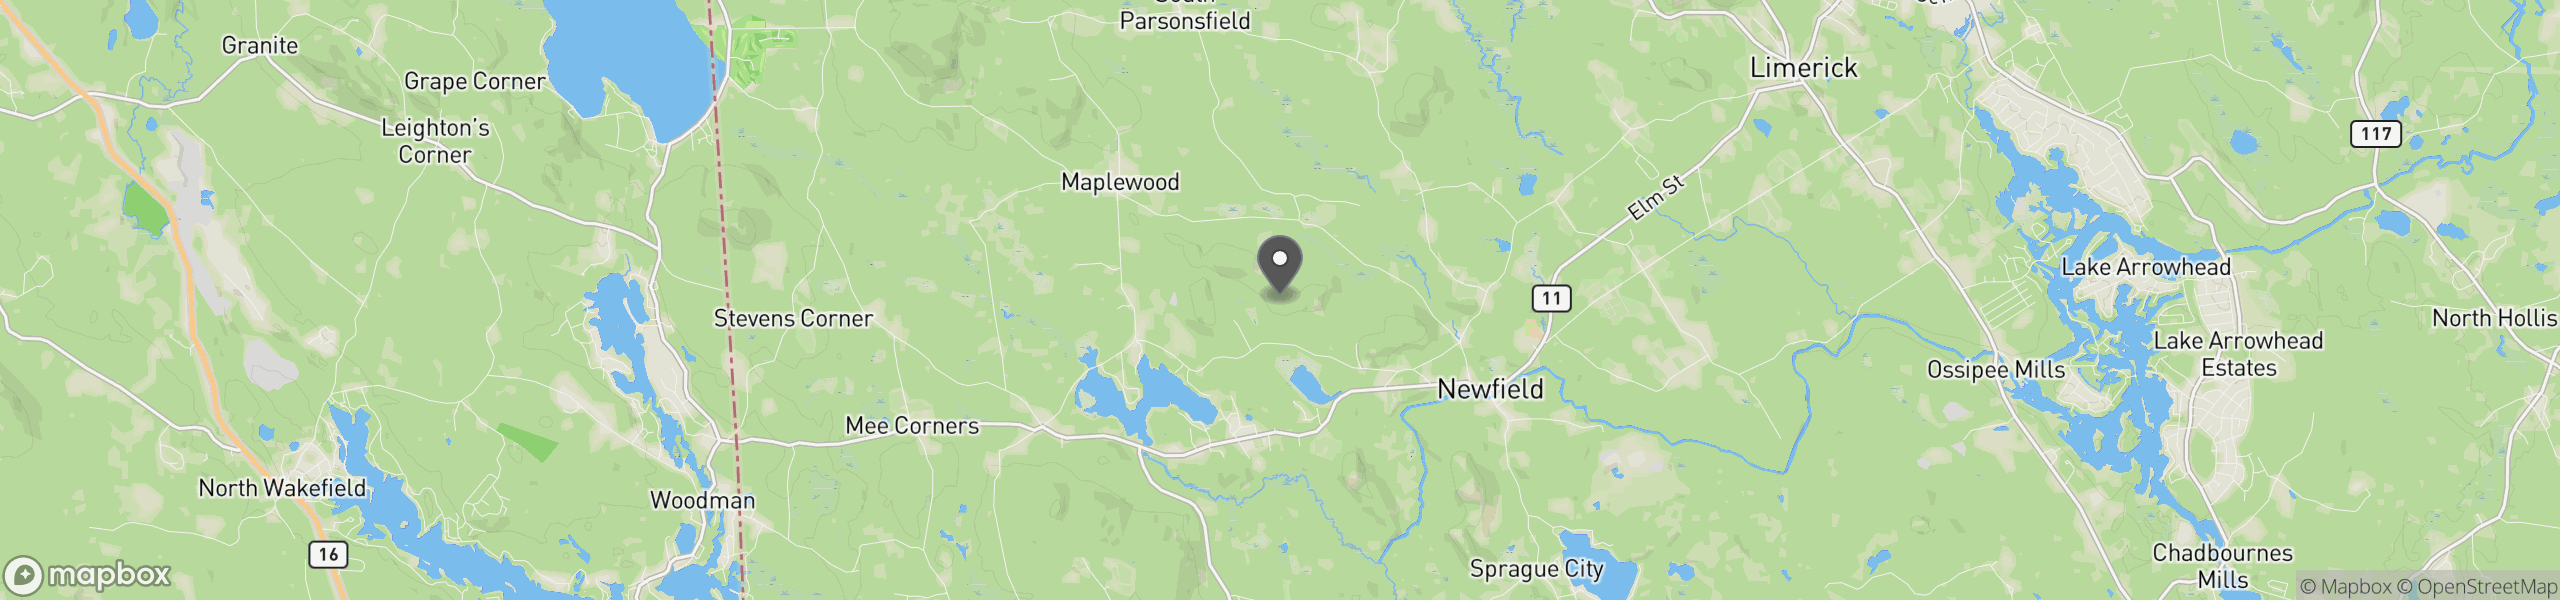 Newfield, ME 04056